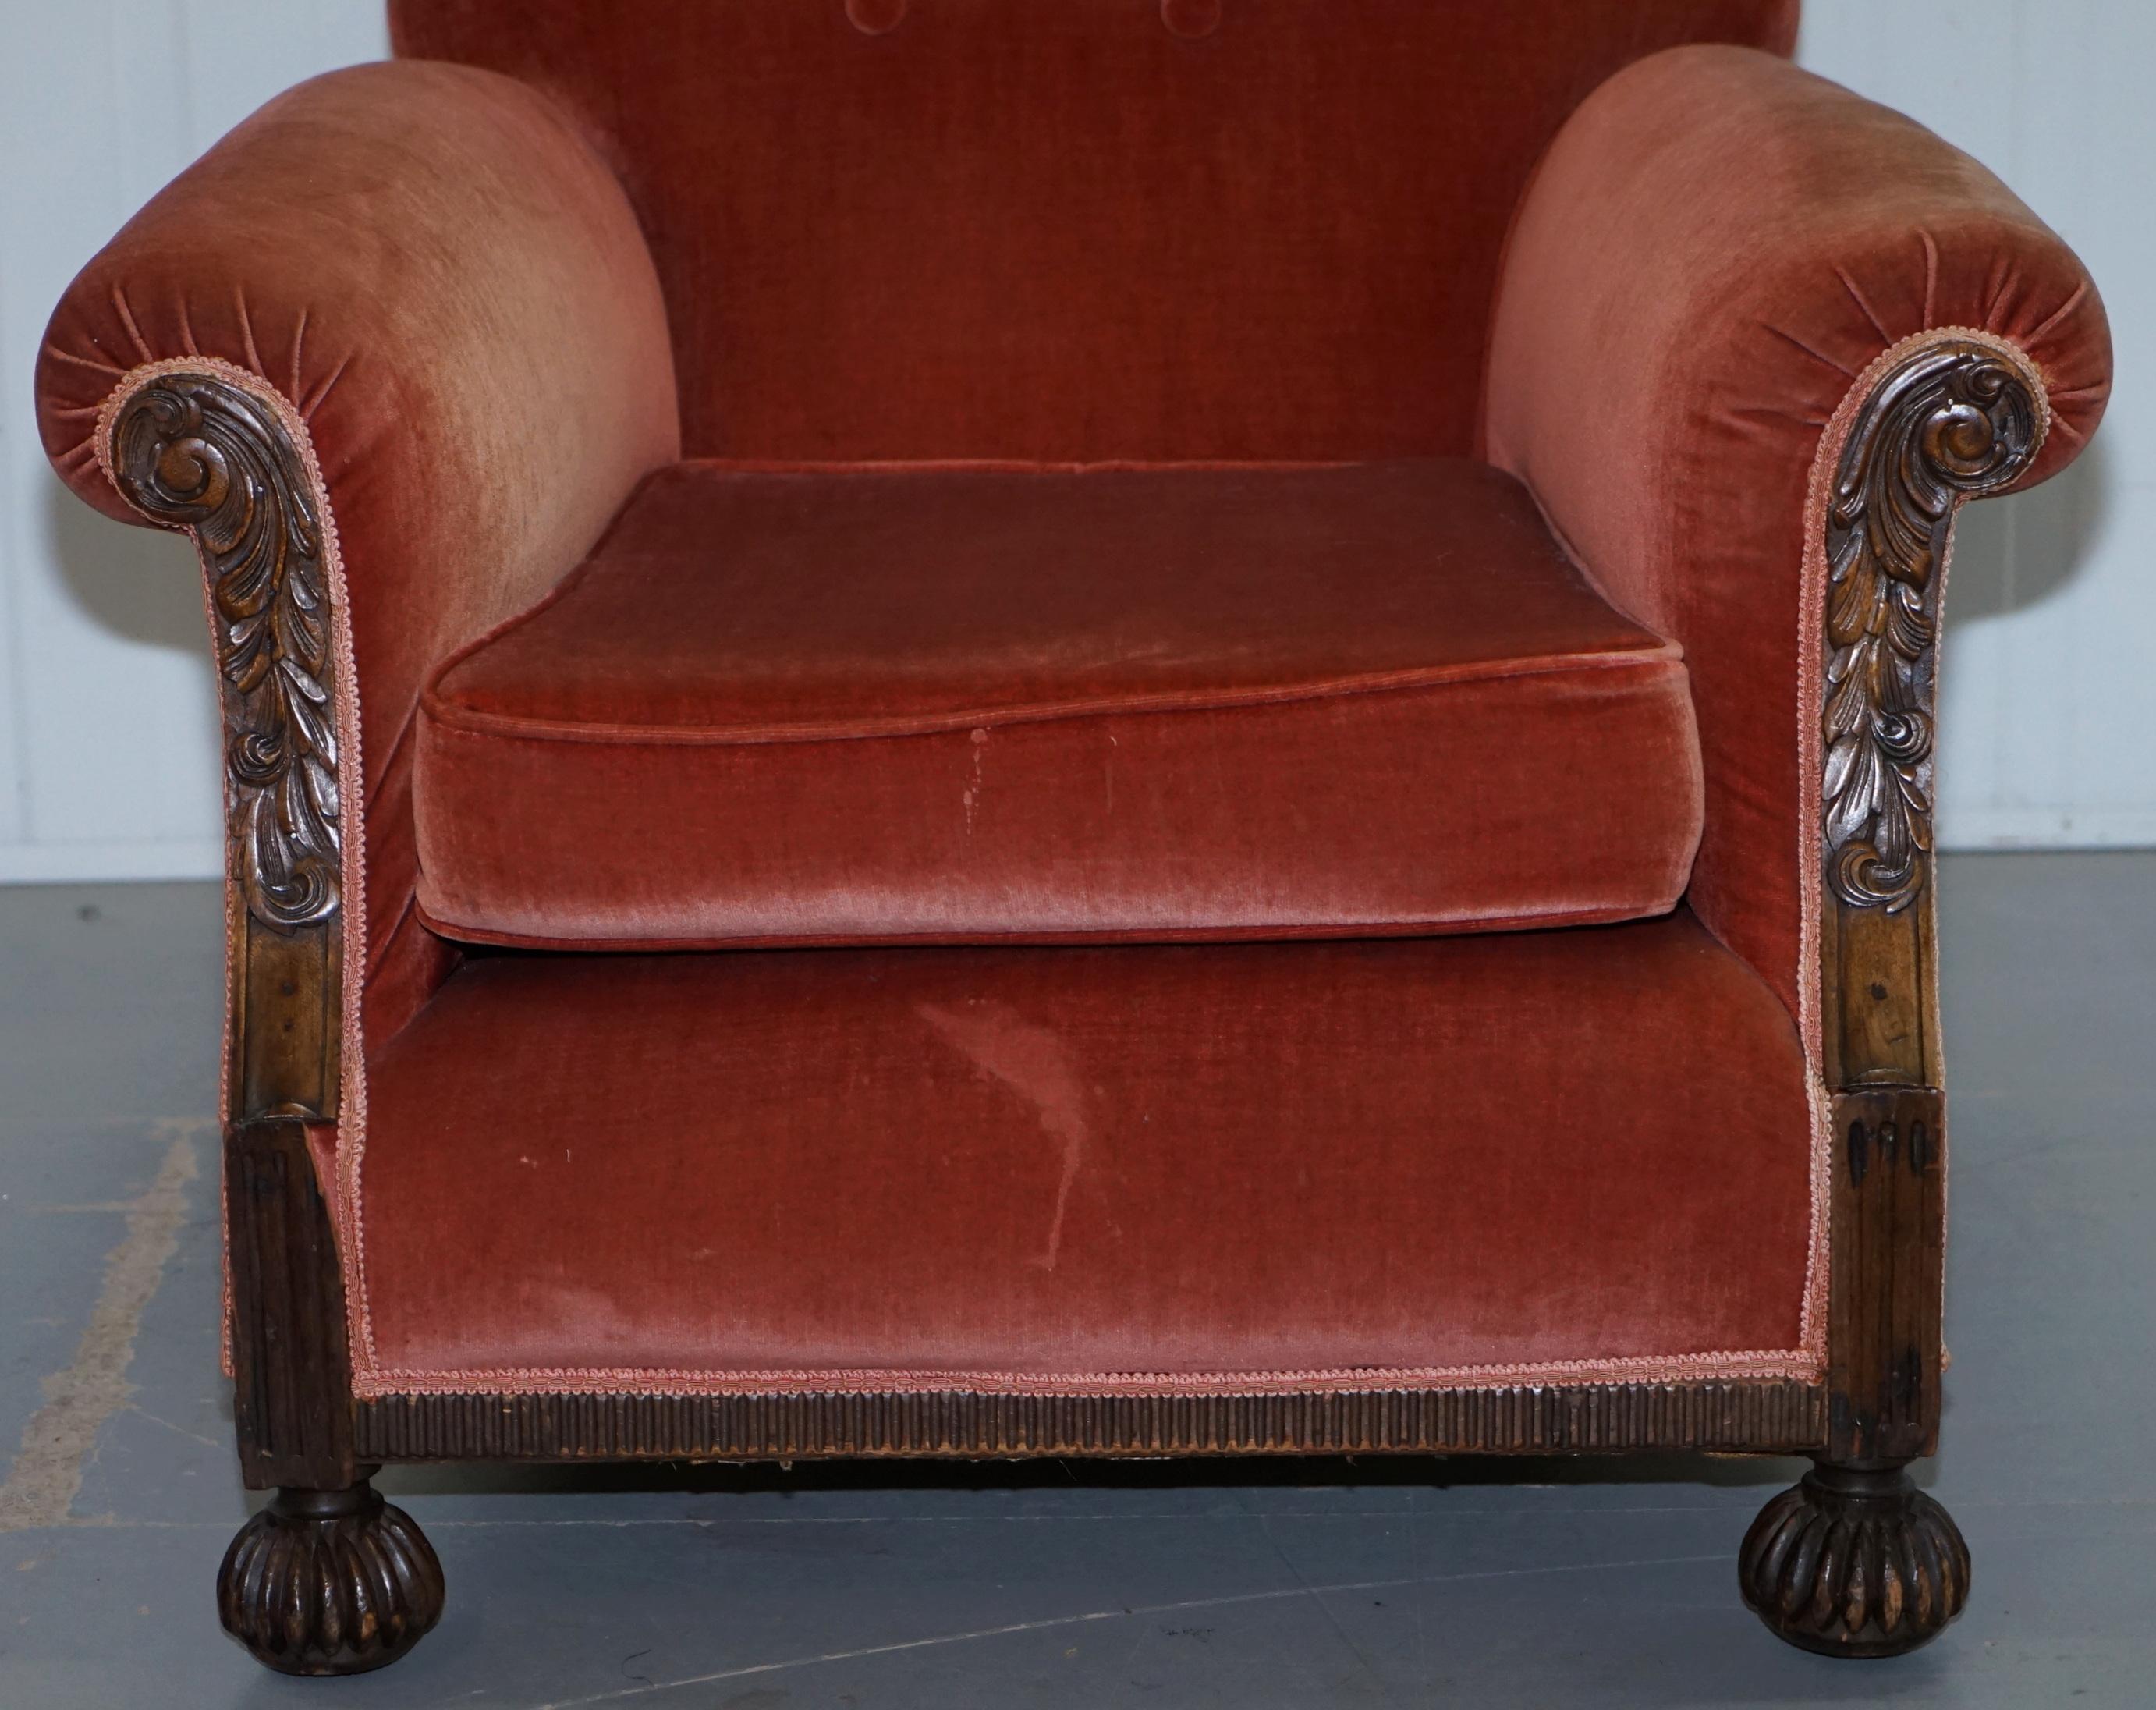 Upholstery Rare Original Victorian Suite Ideal Restoration Project Club Armchairs and Sofa